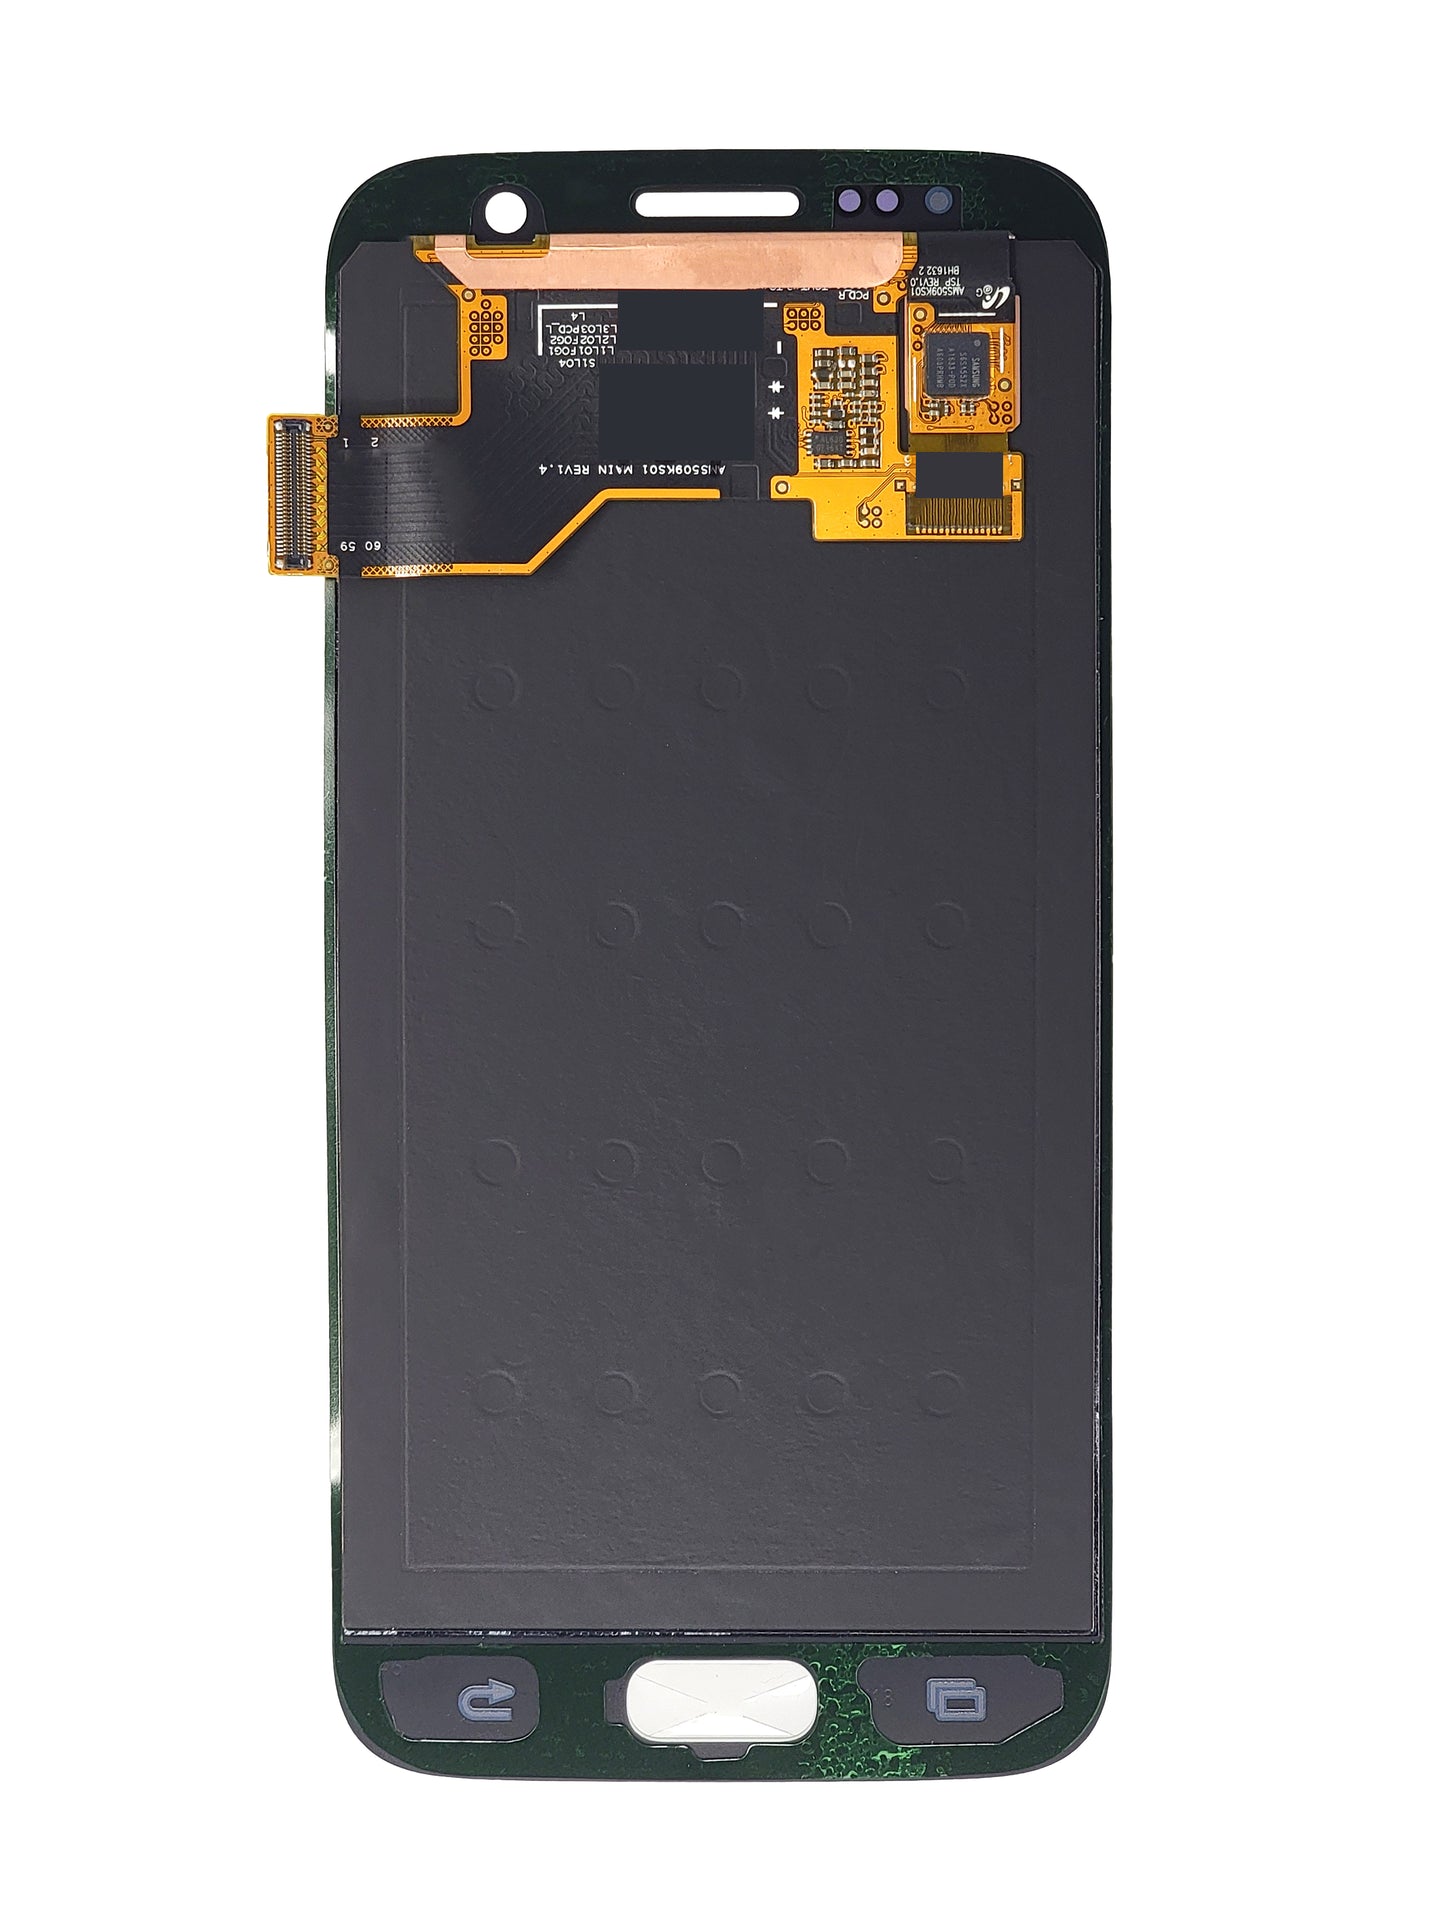 SGS S7 Screen Assembly (Without The Frame) (Refurbished) (Black Onyx)